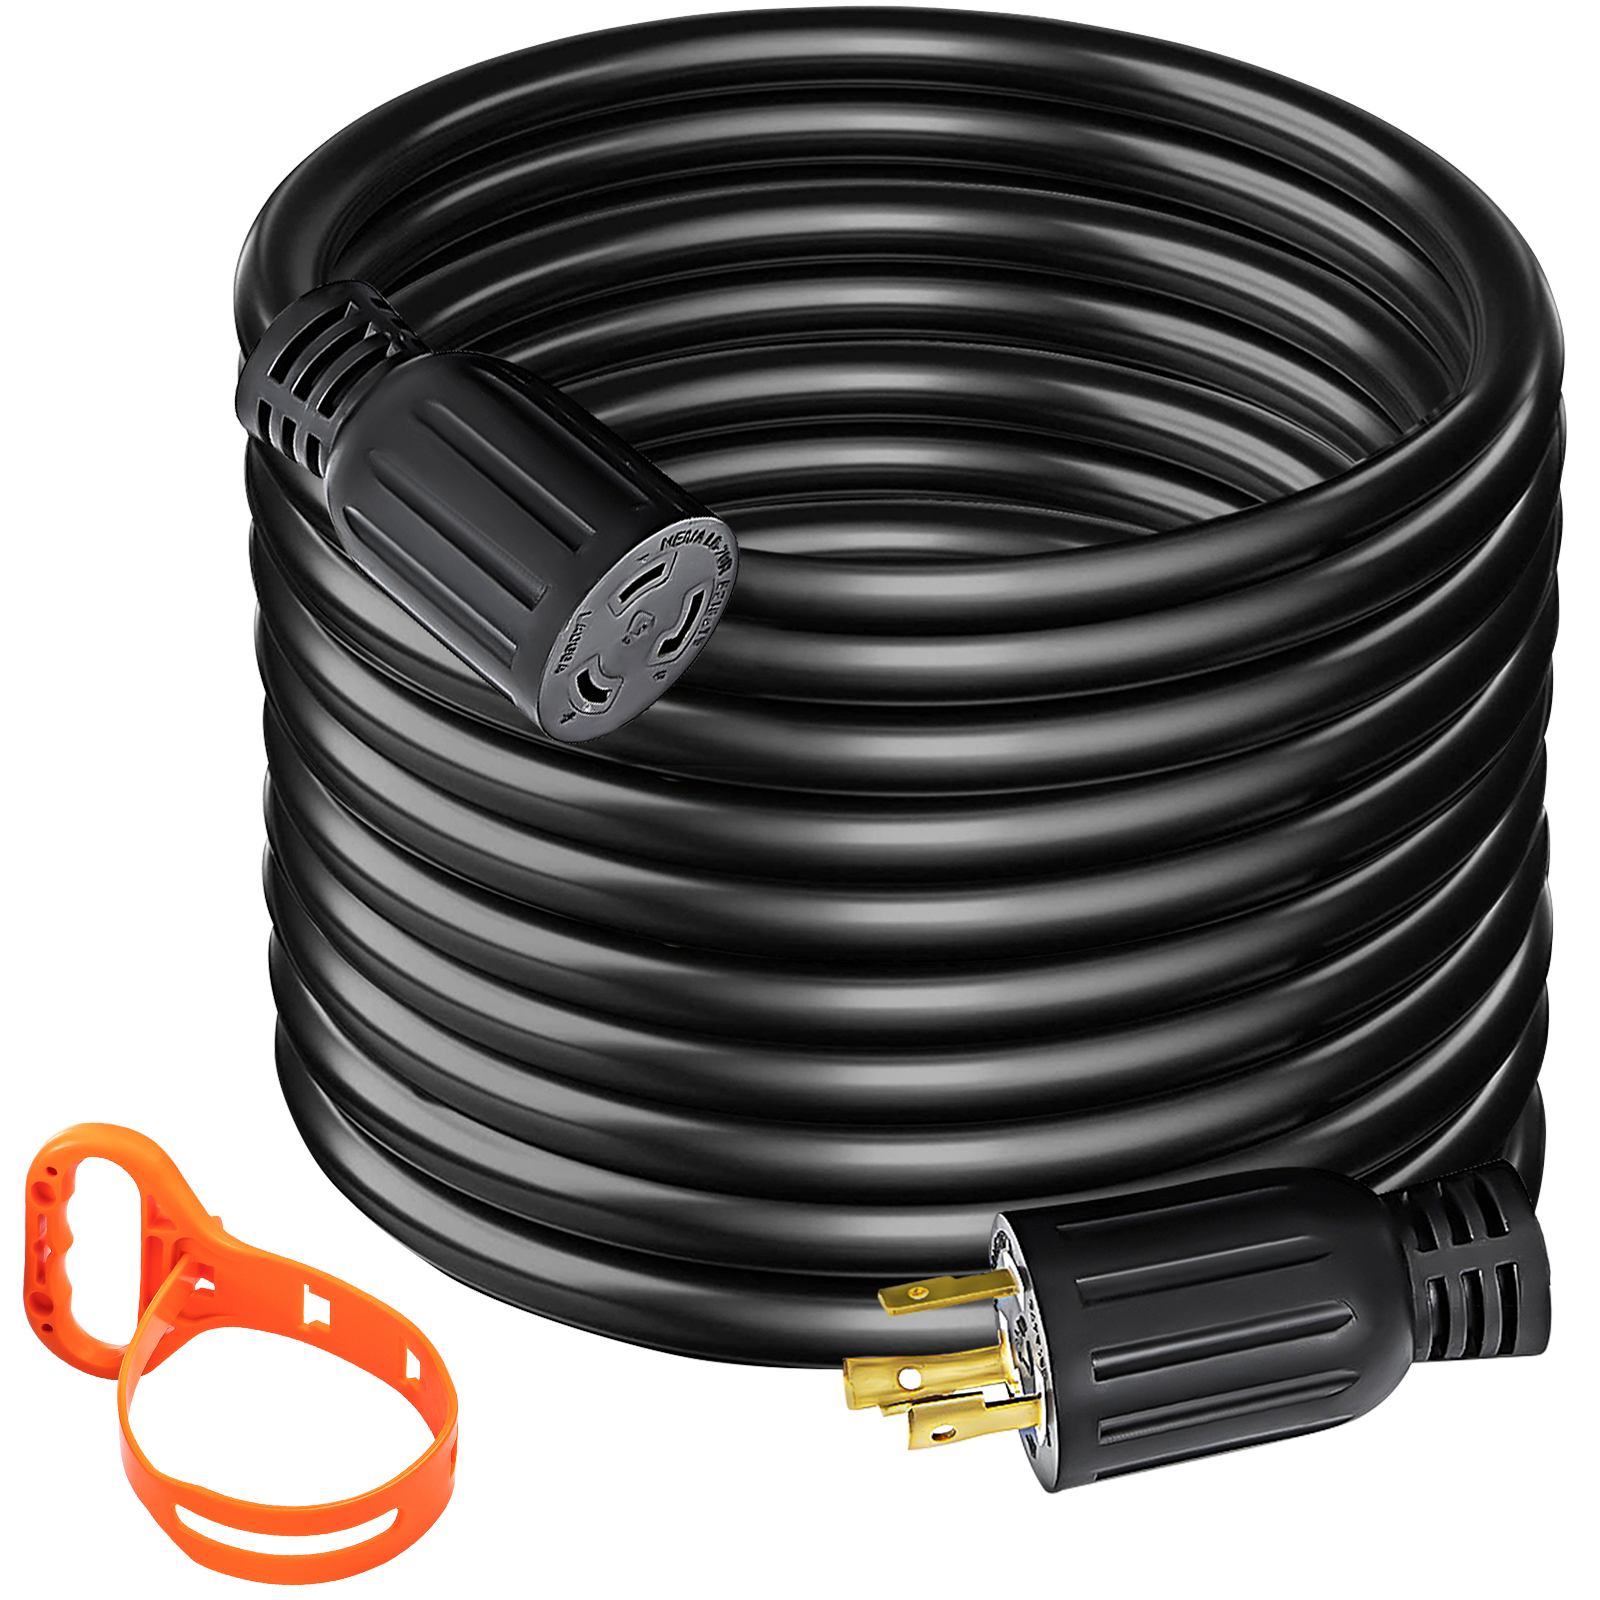 VEVOR Generator Extension Cord Power Cord 50FT 30 Amp Extension Cord 10/3  L5-30P To L5-30R Rubber Locking Connector 125V RV Power Cord SJTW 60C FT2  for Camping, Anti-Weather, Oils and Chemicals